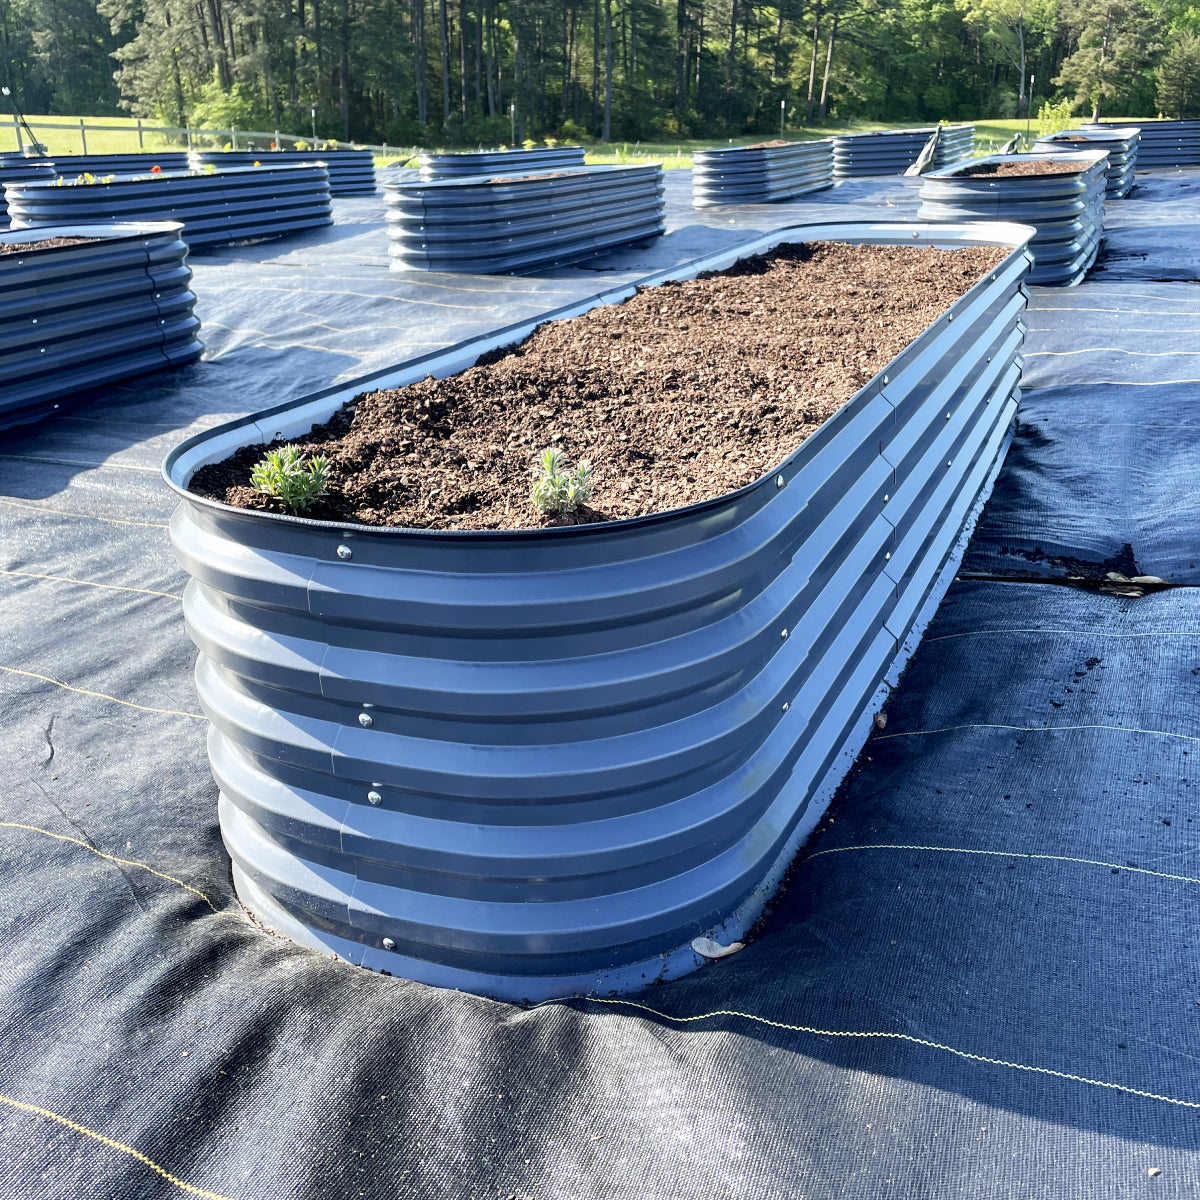 metal raised garden beds placed on landcape fabric